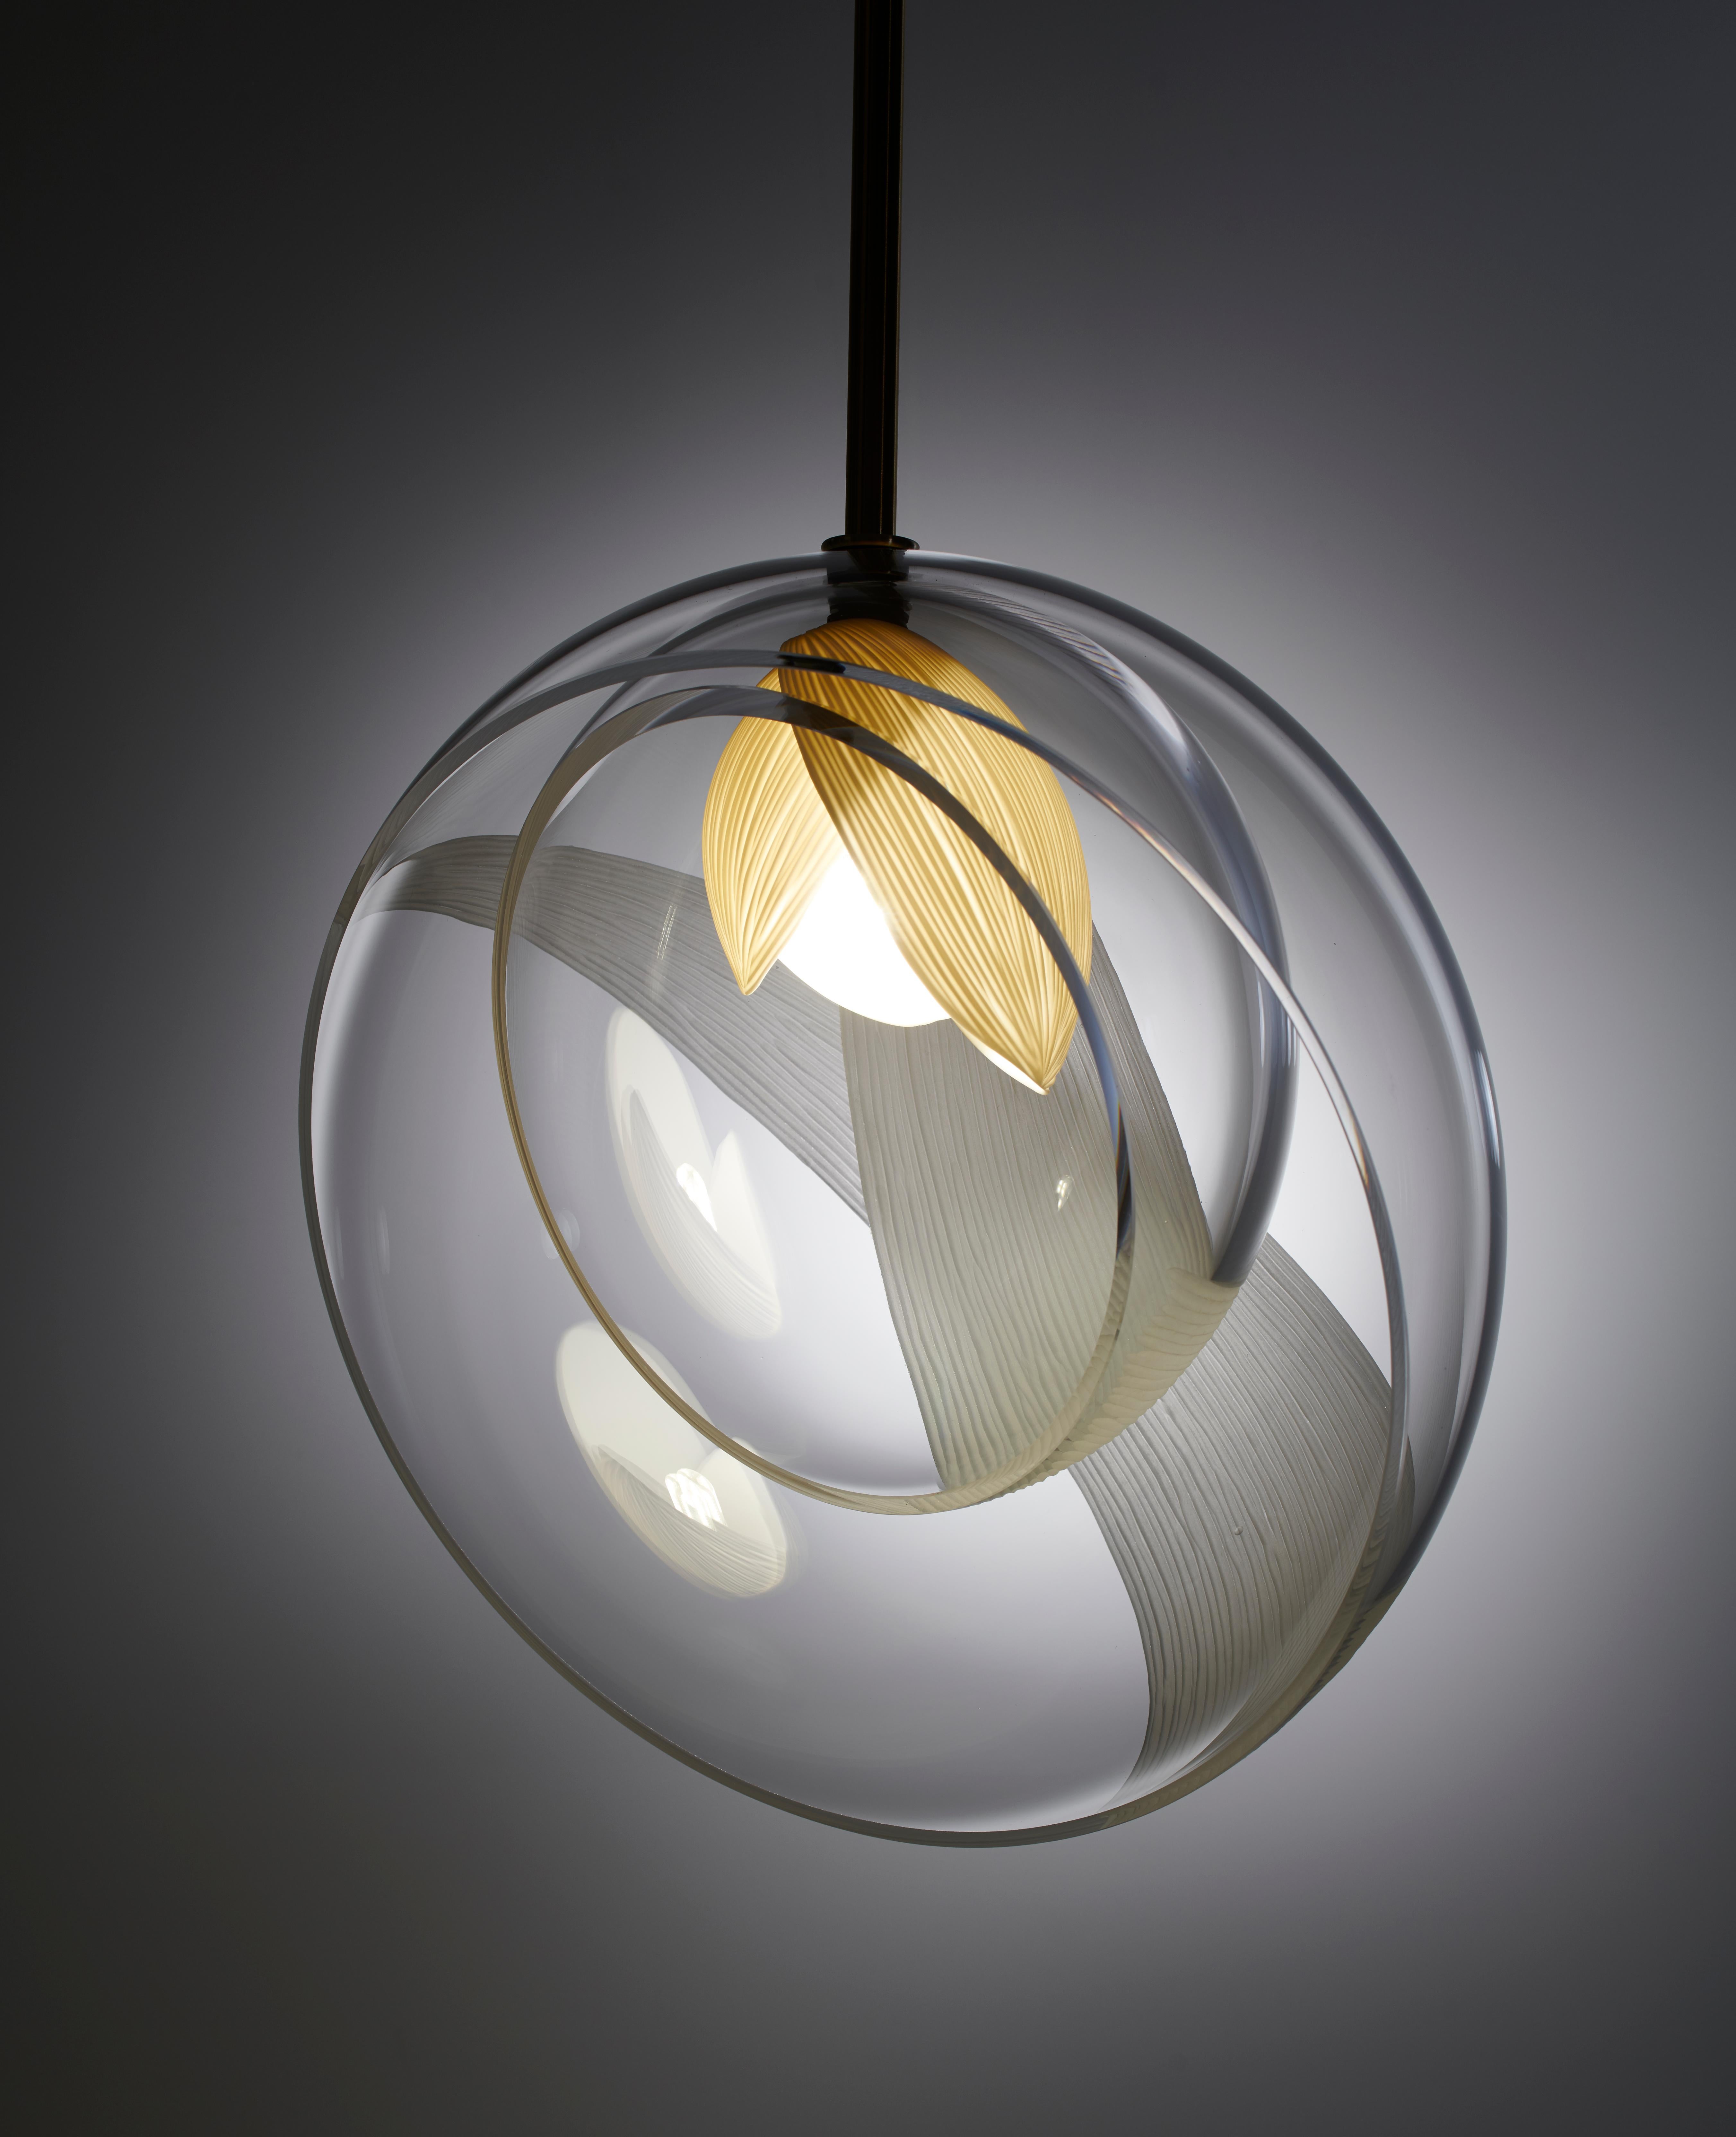 Gem large light by Vezzini & Chen
Dimensions: D35cm X H35cm
Materials: Furnace Glass, Porcelain, 4w G9 Dimmable Warm white LED, brushed brass fitting, 2 Core double insulated electric cable + Earth.
Also available: Brass Fitting and flex cable,